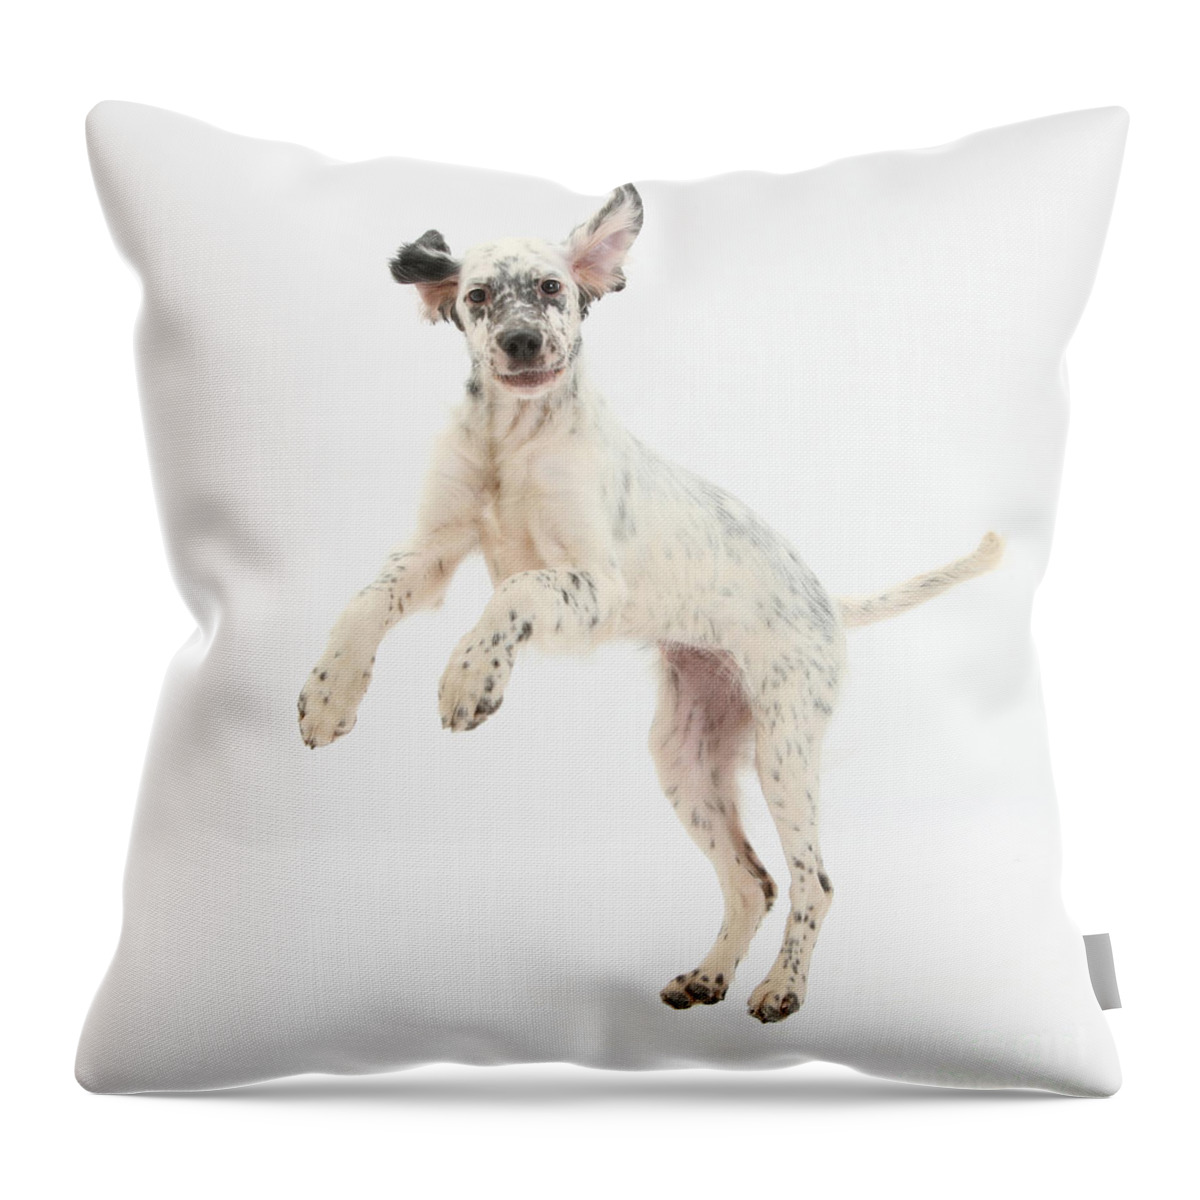 Dog Throw Pillow featuring the photograph Blue Belton English Setter by Mark Taylor